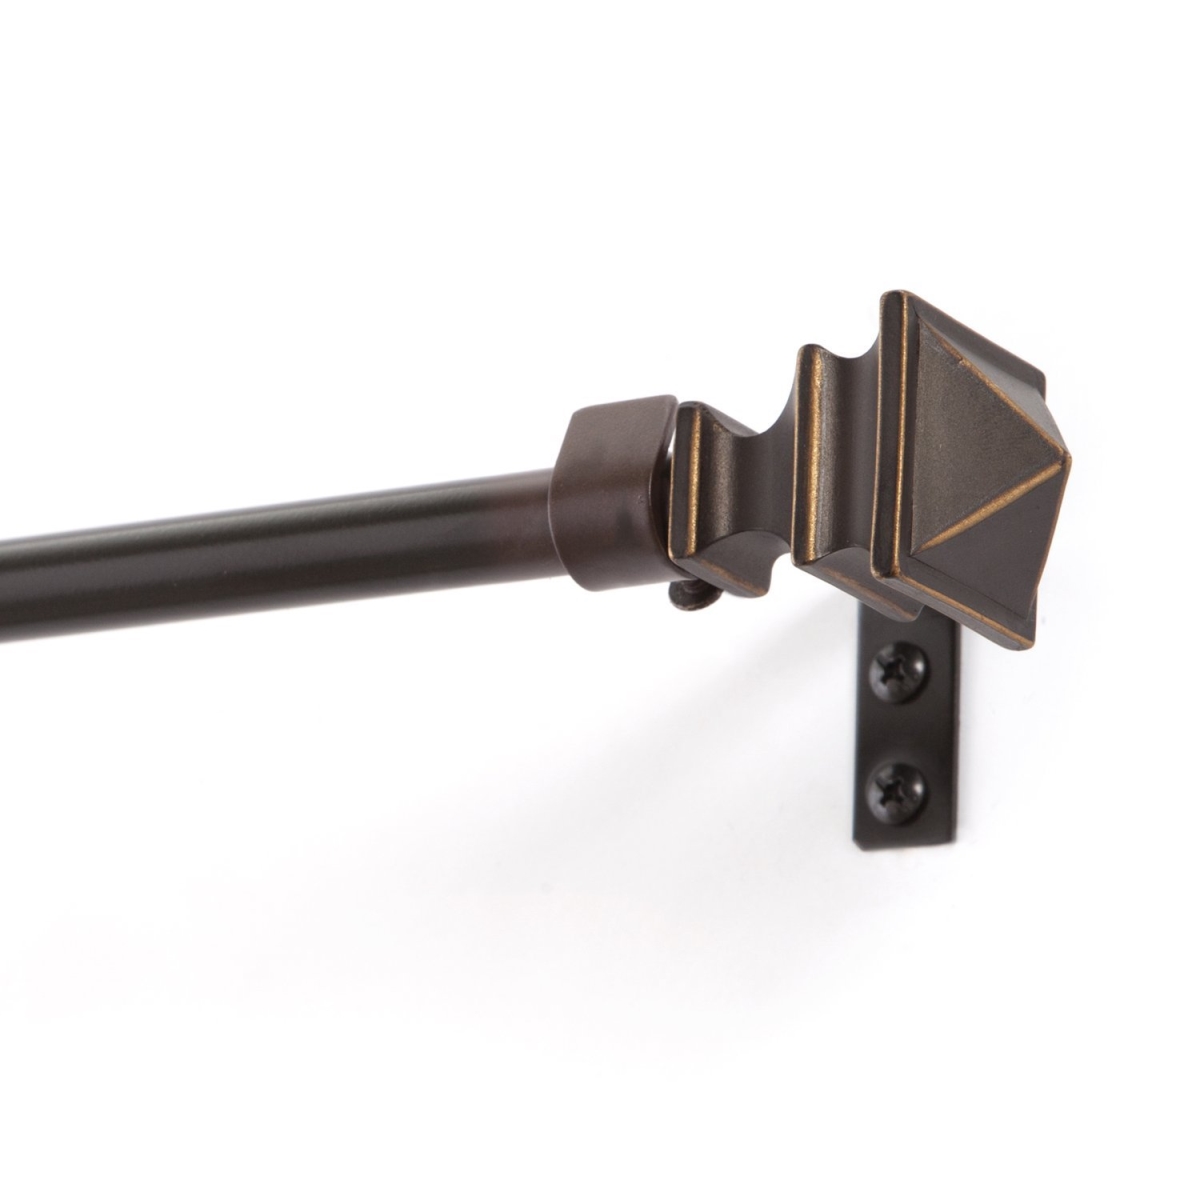 32-1004-8orb 72-144 In. Painted Oil Rubbed Bronze Finish Single Rod Window Hardware With Resin Square Finial